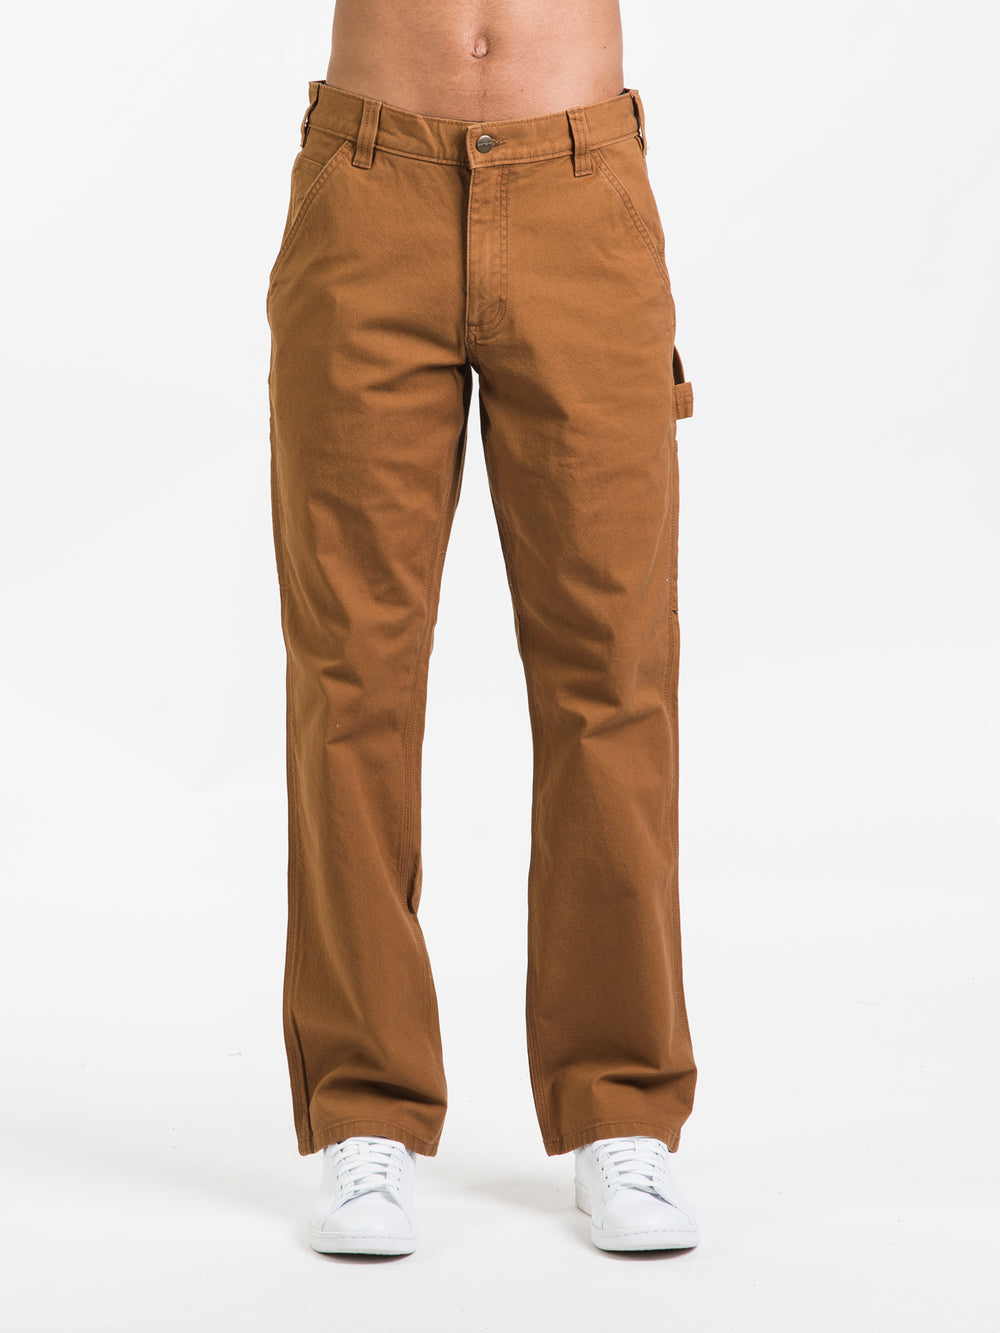 CARHARTT RELAXED FIT DUCKY UTILITY WORK PANTS - CLEARANCE